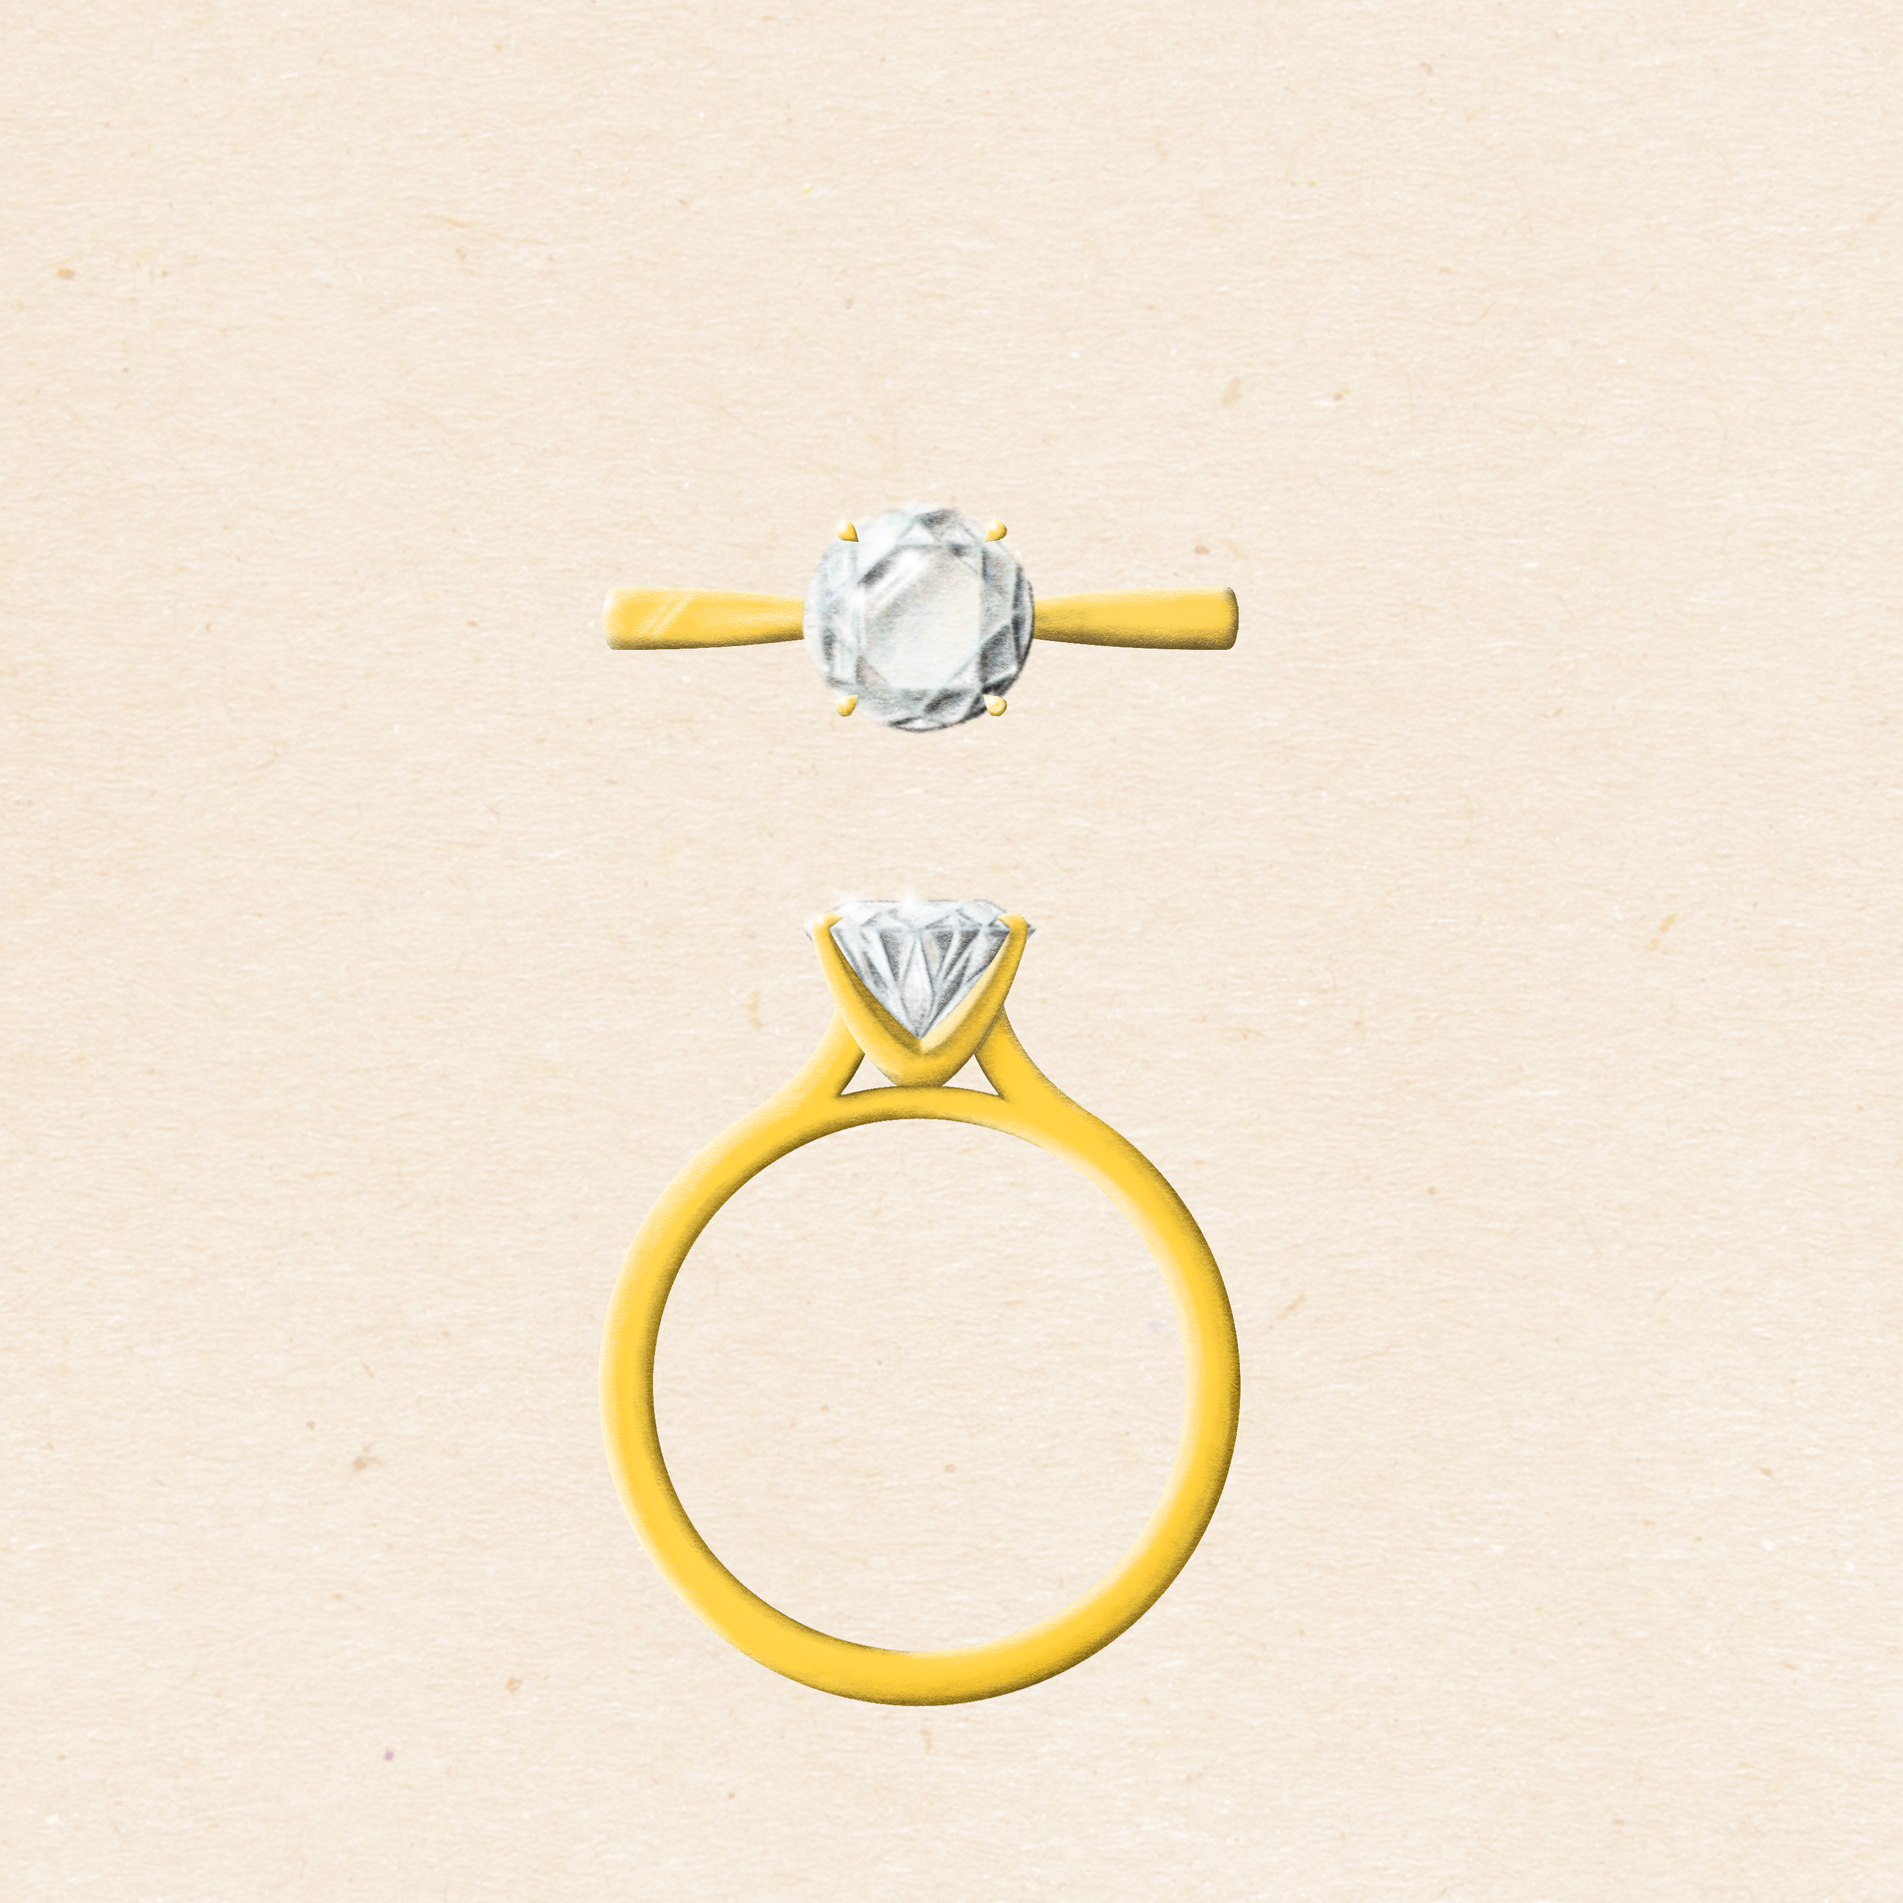 Hand drawing of classic engagement ring design Tulipano setting solitaire diamond with four claws and yellow gold band 